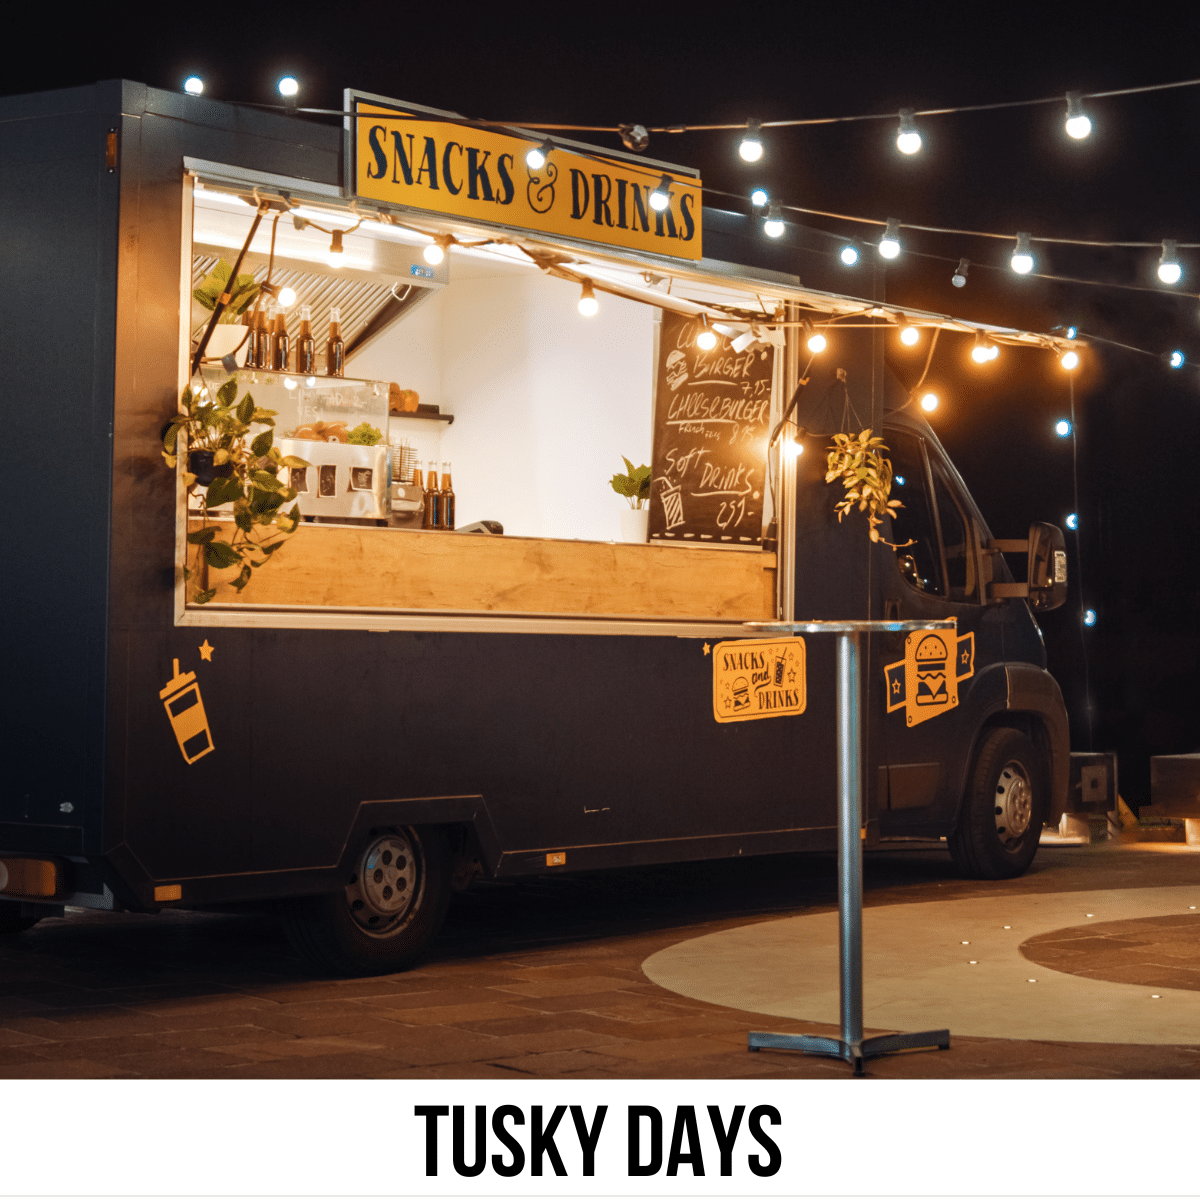 A square image of a photo of a food truck with decorative lights around it, at night. A sign above the truck window says Snacks & Drinks. A white strip across the bottom has text Tusky Days.